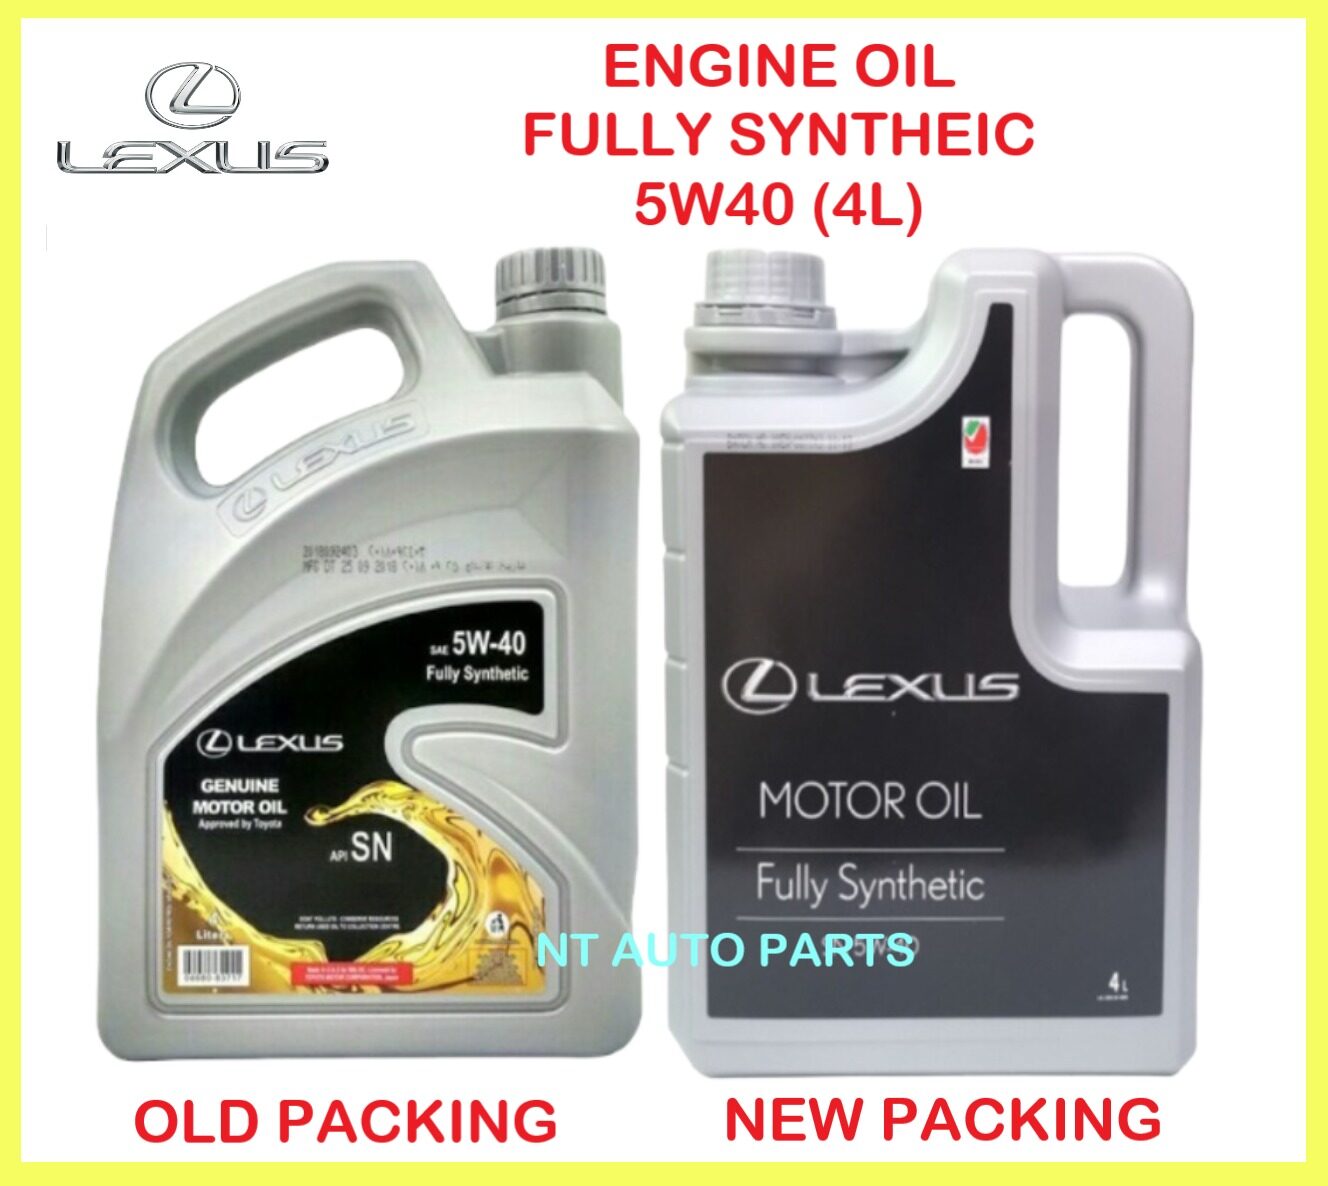 NEW PACKING 2021 &OLD PACKING Lexus 5W40 4LITRE API SN Fully Synthetic Engine Oil Free Mileage Sticker Minyak Hitam